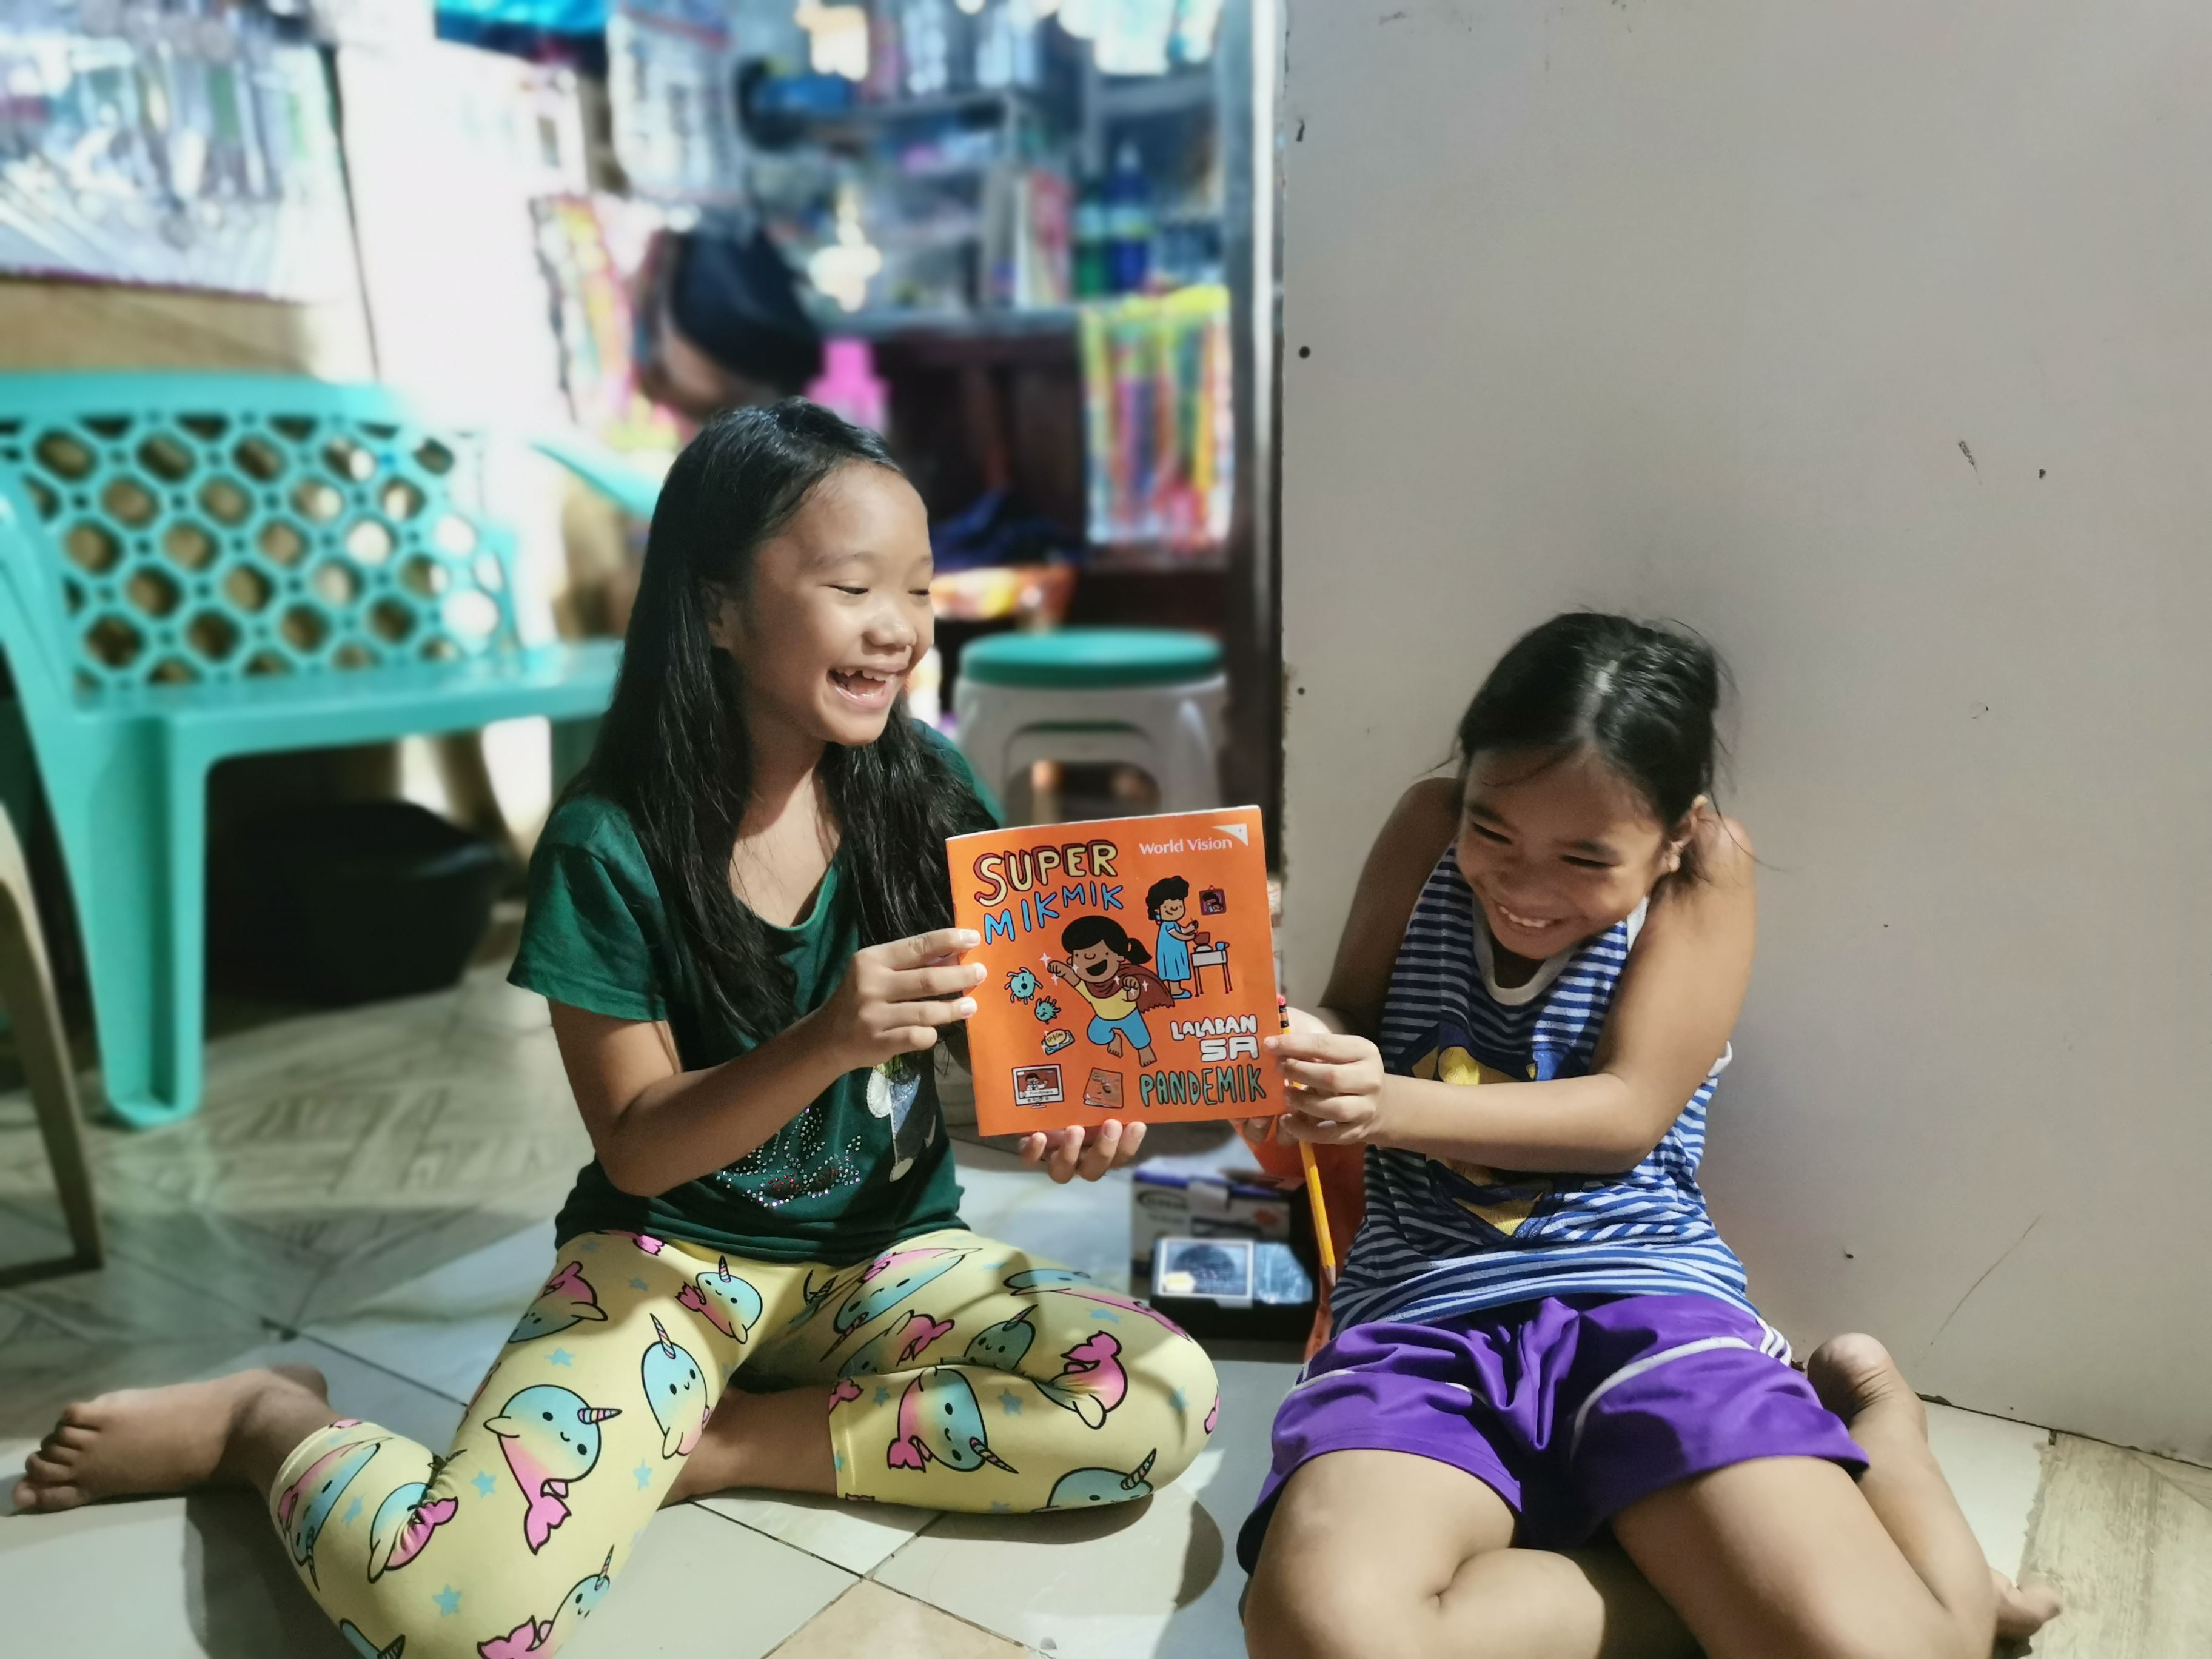 Two girls smile and laugh as they hold a magazine between them, sitting on the floor in the Philippines